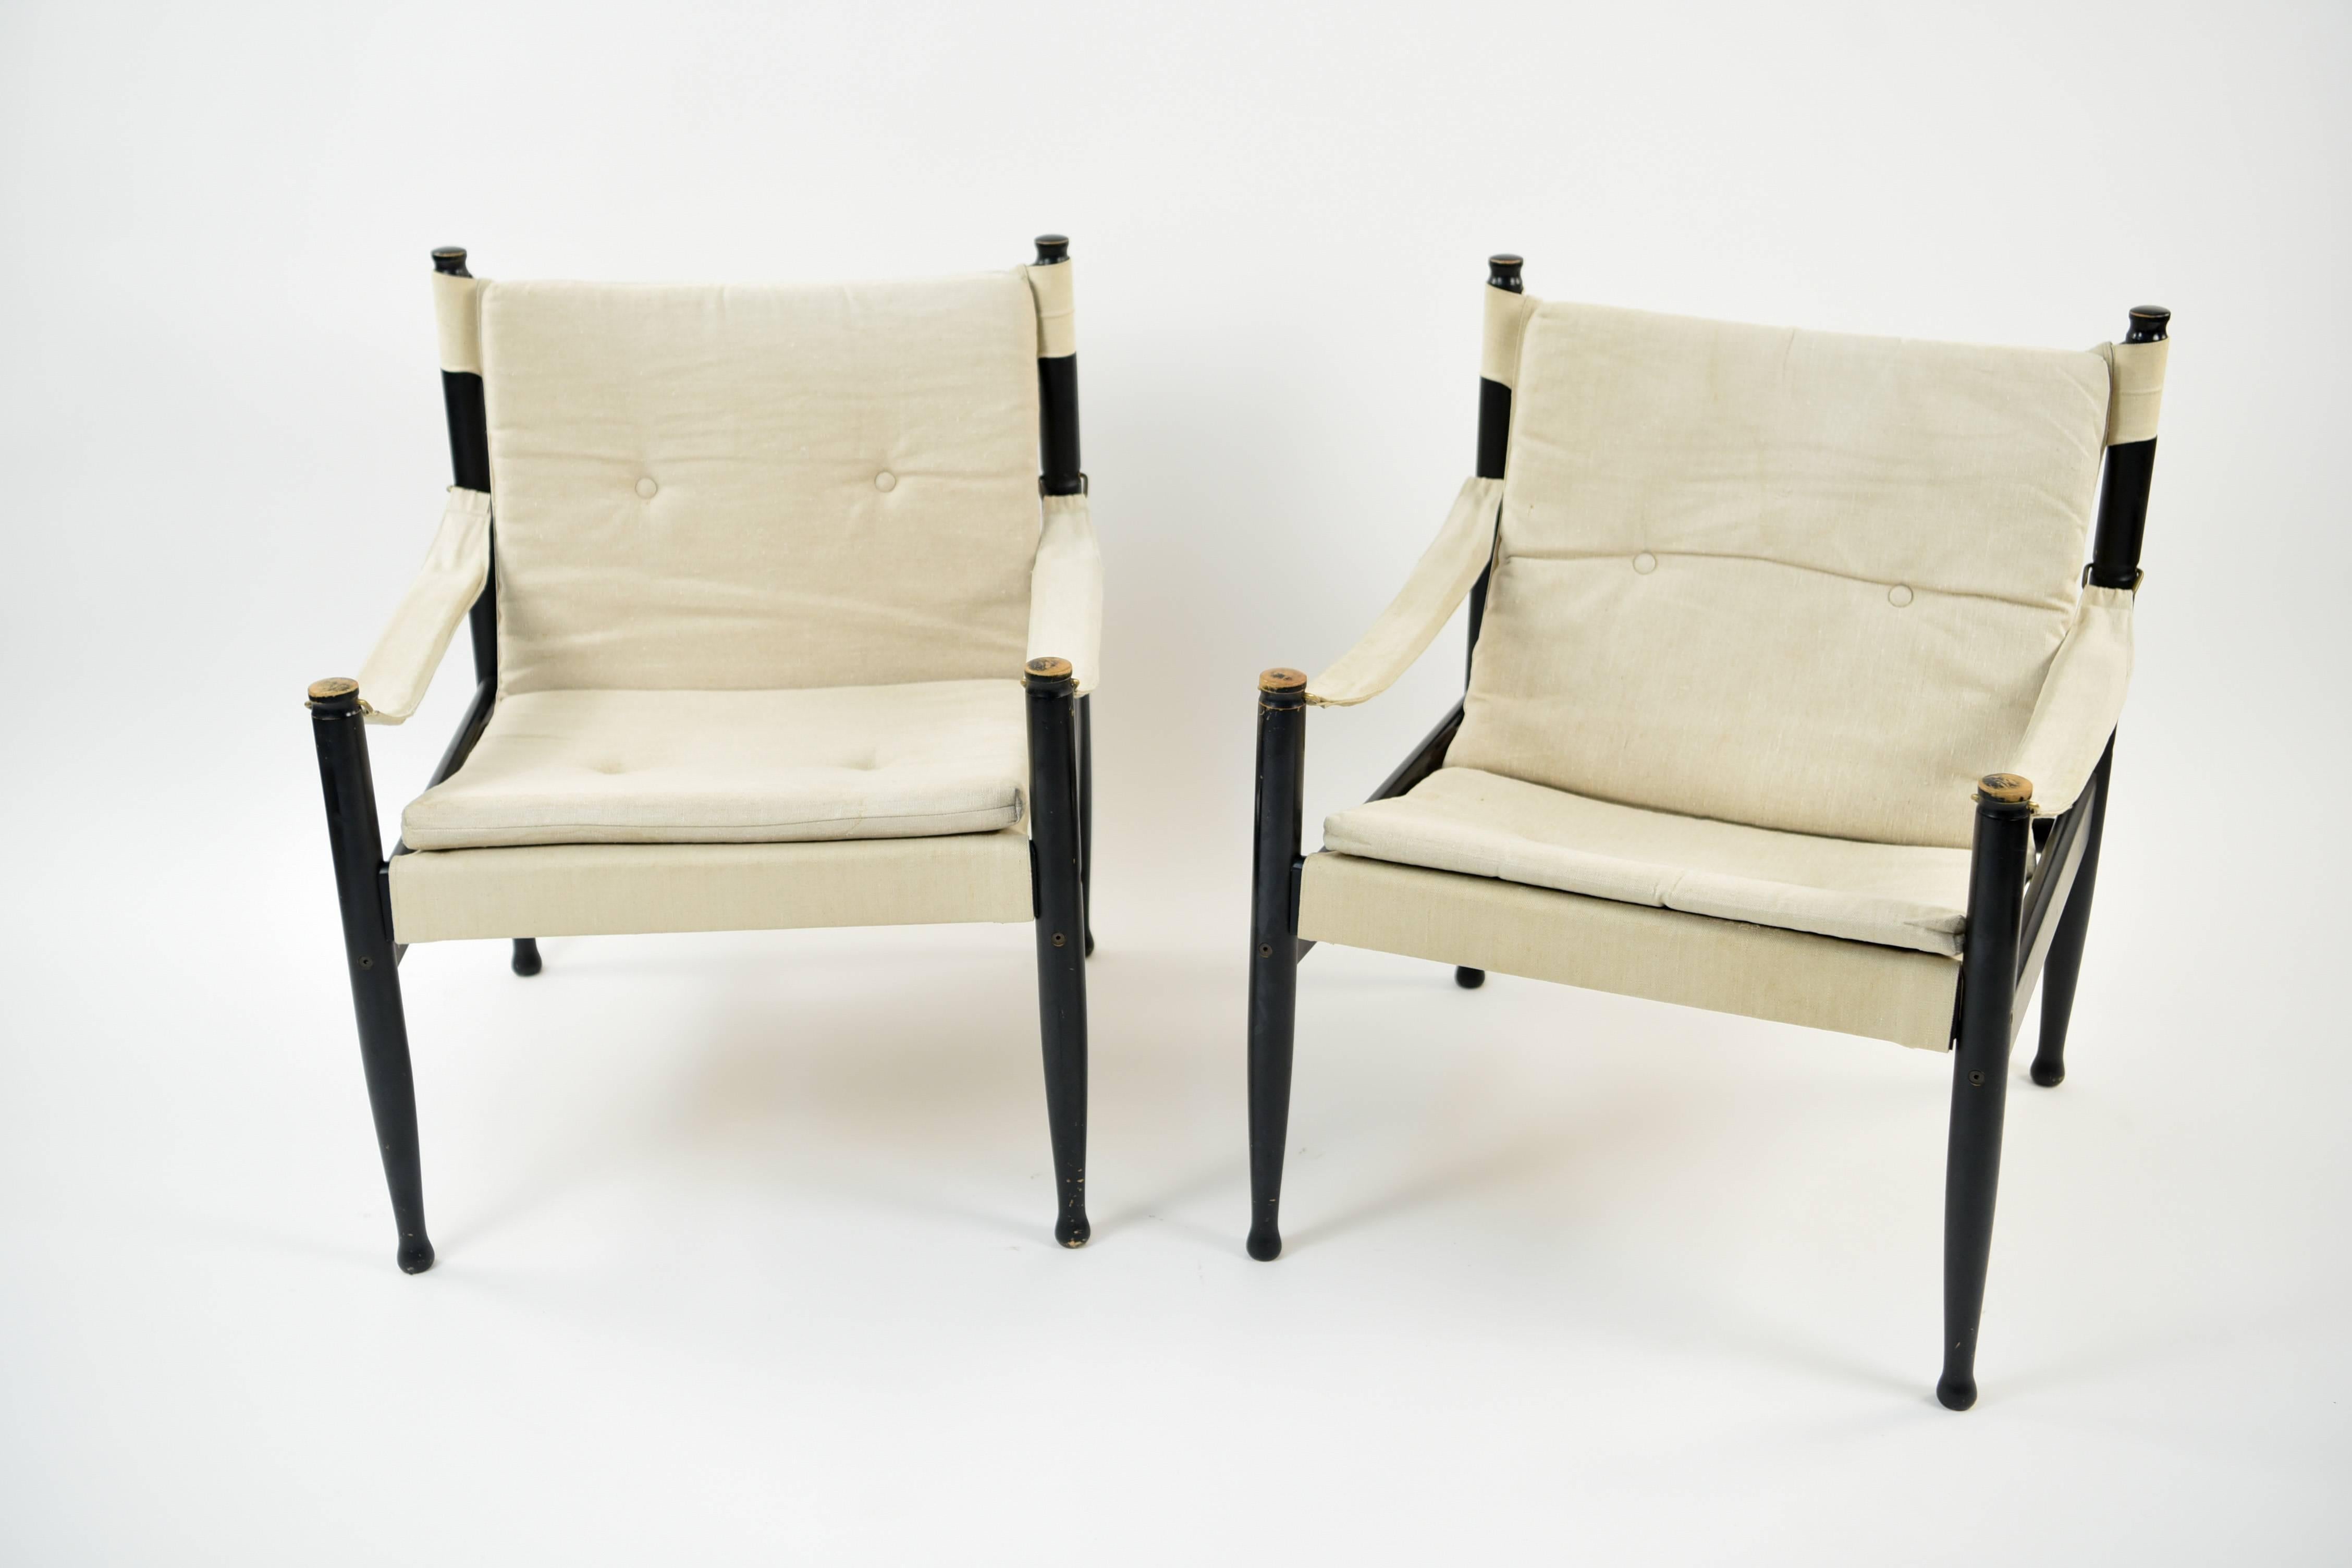 This pair of model 30 sling safari chairs was designed by Erik Worts for Niels Eilersen. They are Danish, circa 1960s, and feature a double tufted backrest and seat cushion.